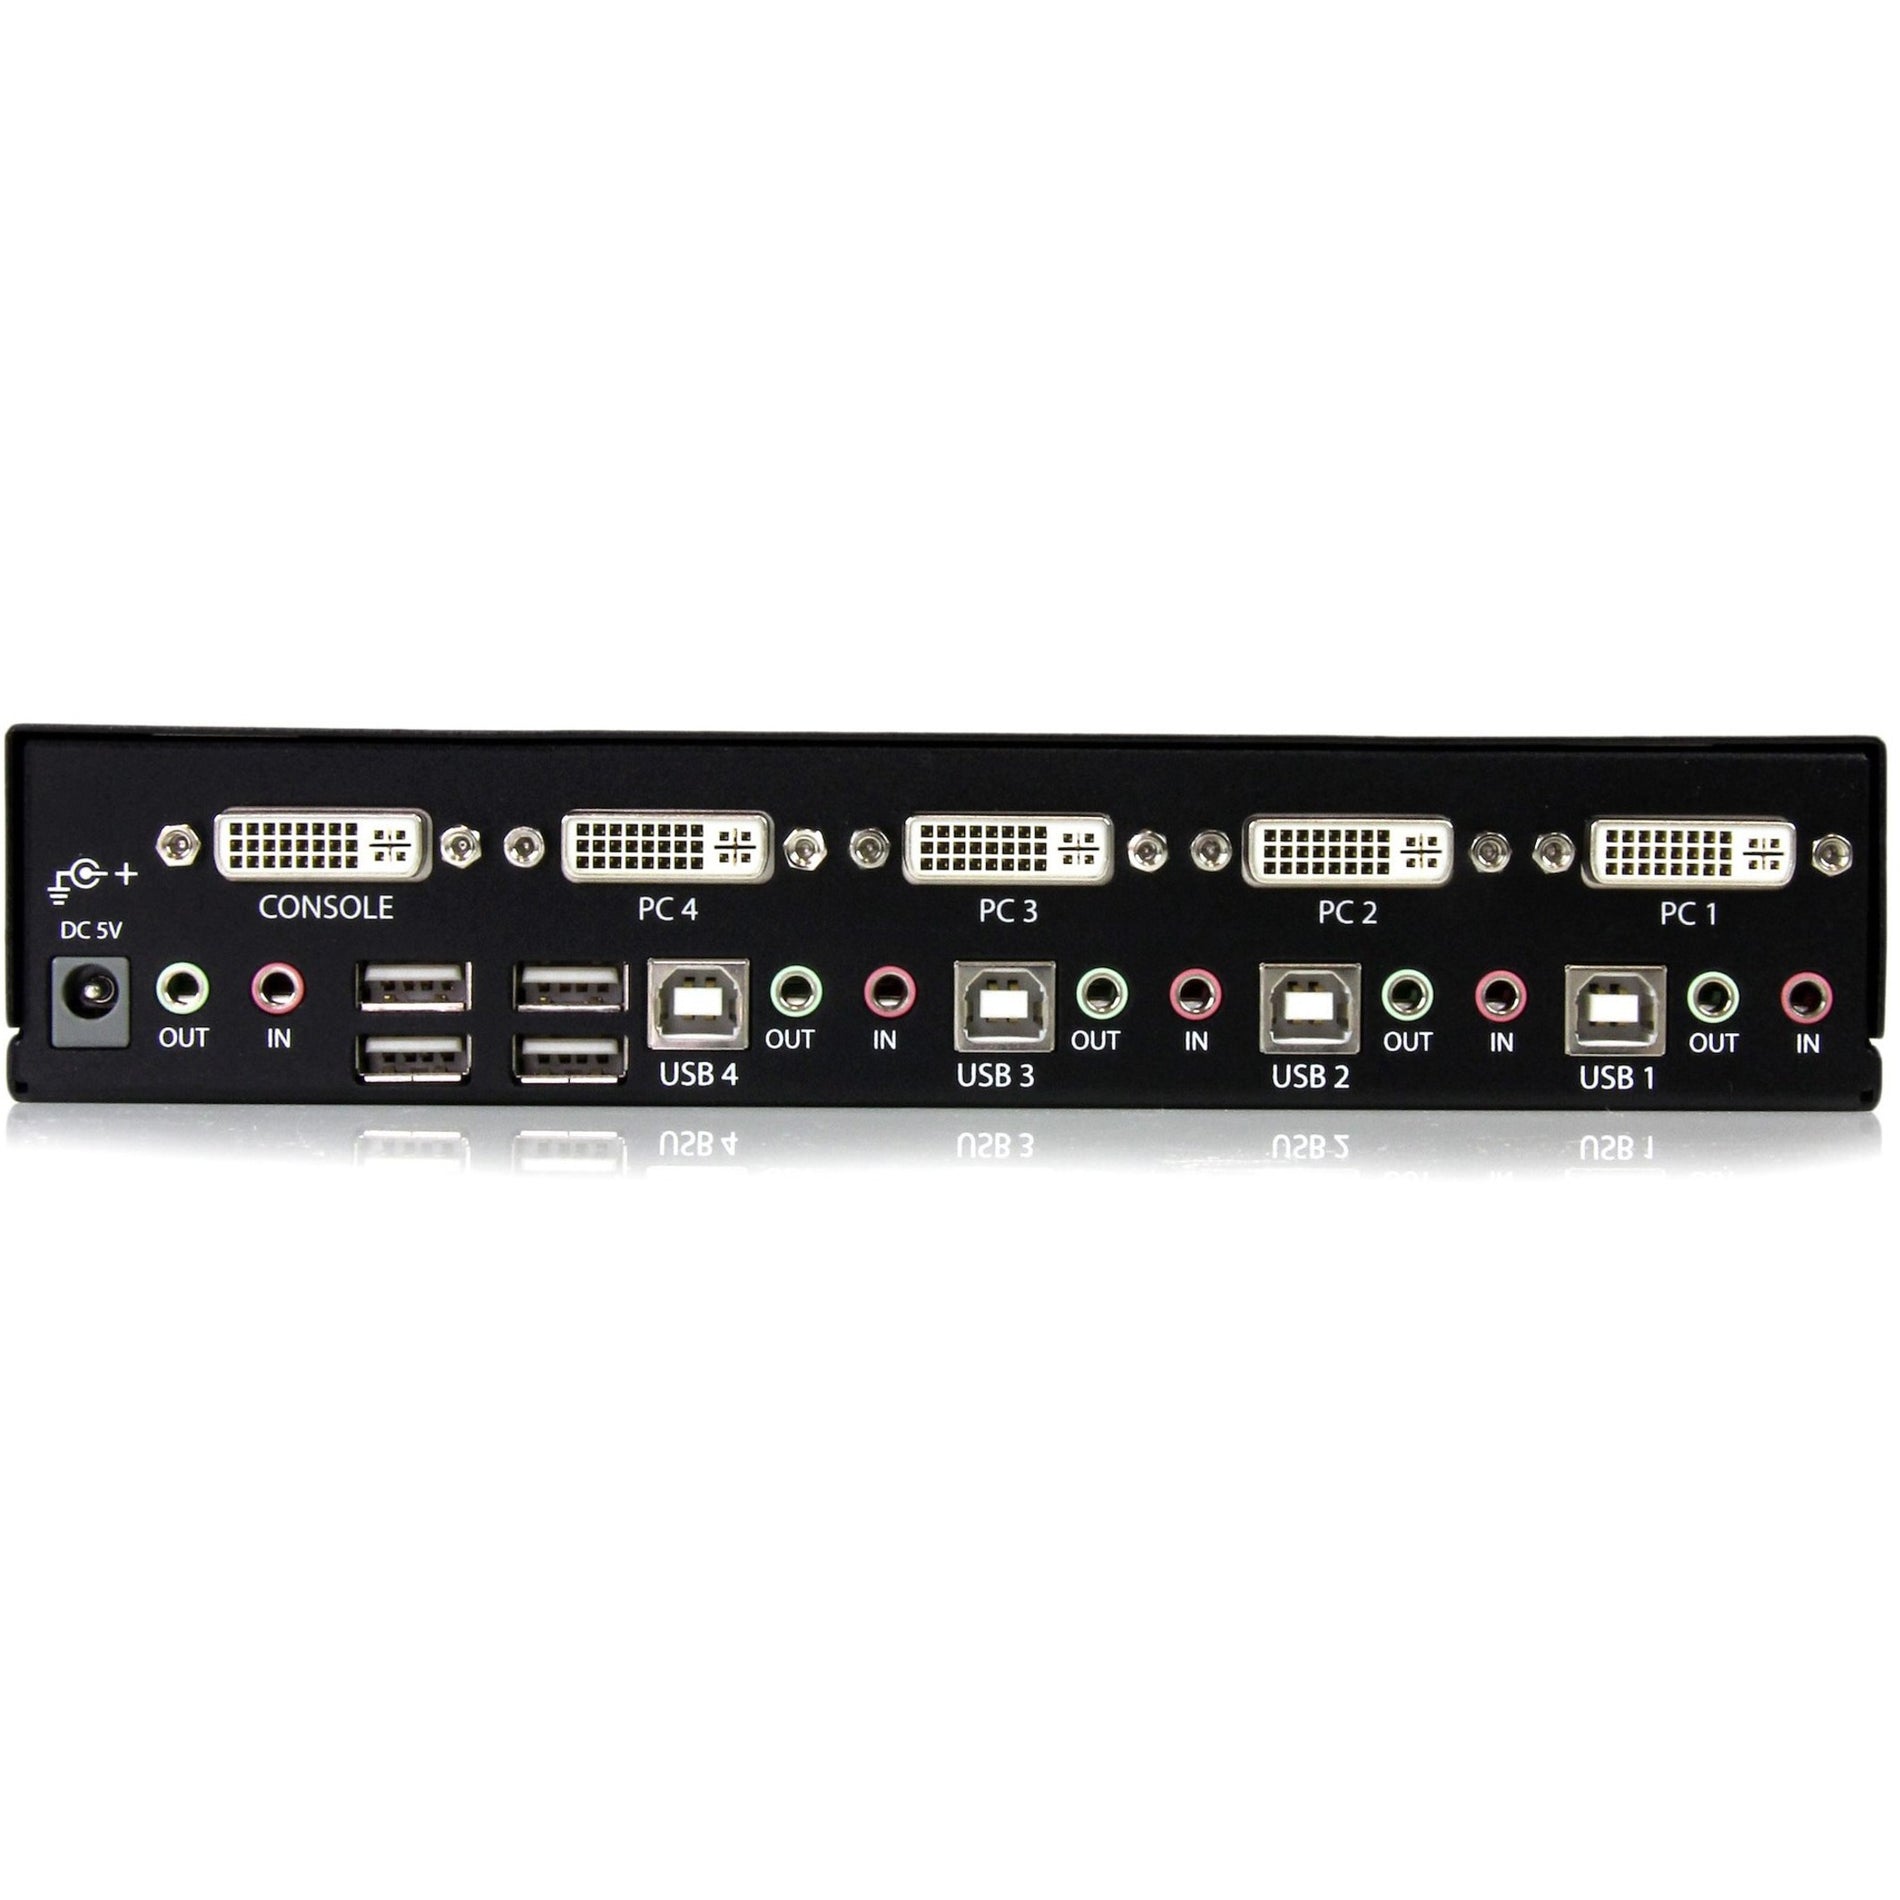 StarTech.com SV431DVIUA 4 Port DVI USB KVM Switch with Audio, Control up to 4 USB-Enabled Multimedia Computers with DVI